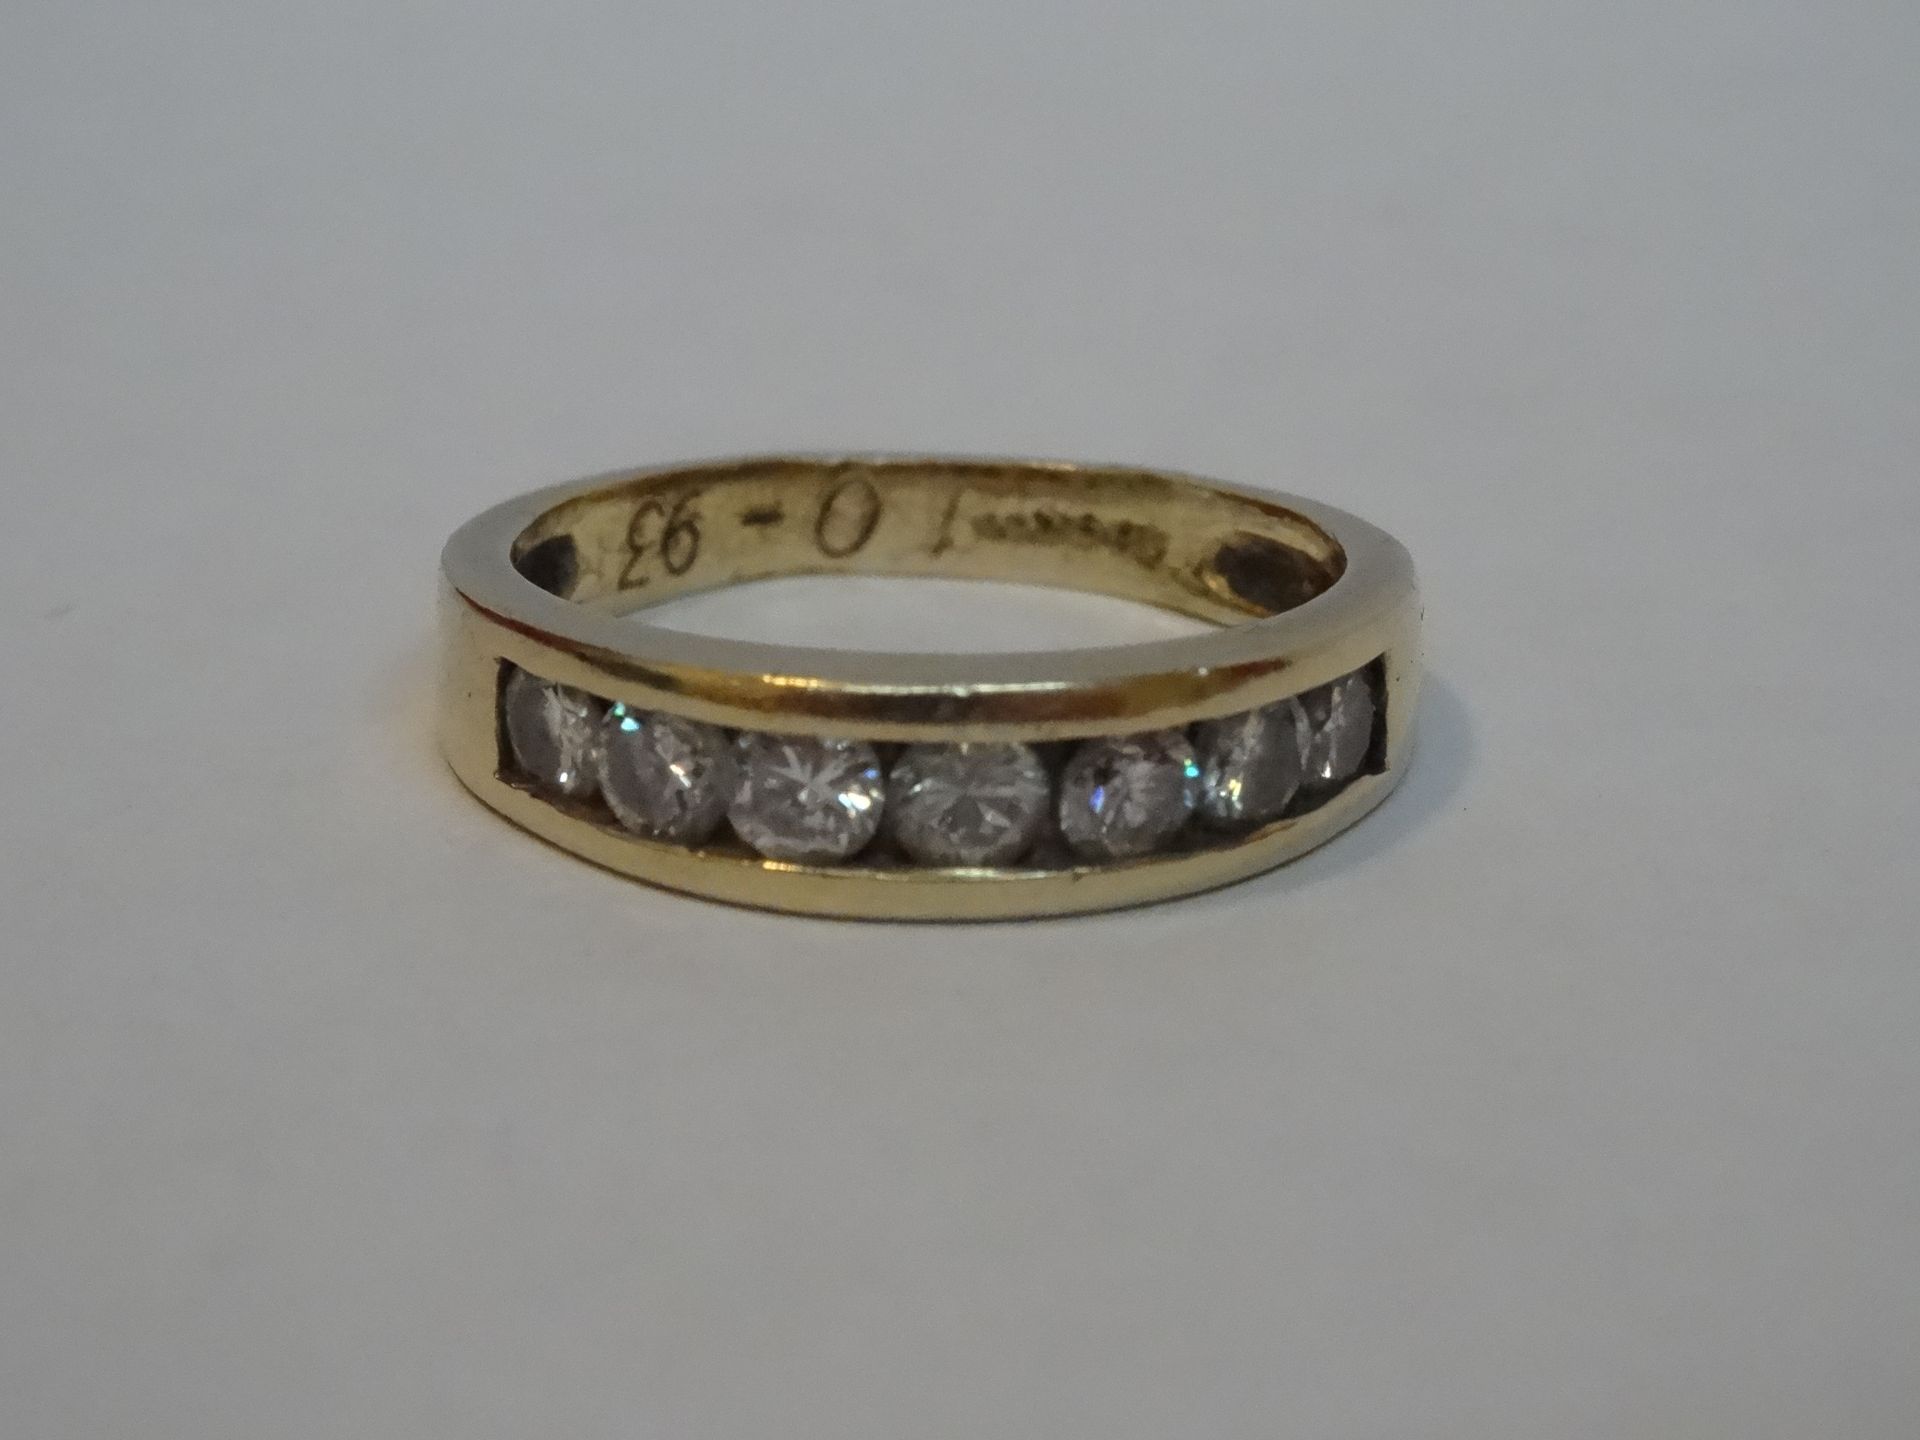 14 Carat Yellow Gold Channel Set Diamond Half Eternity Ring._x00D__x00D_
Containing 0.77Carats of